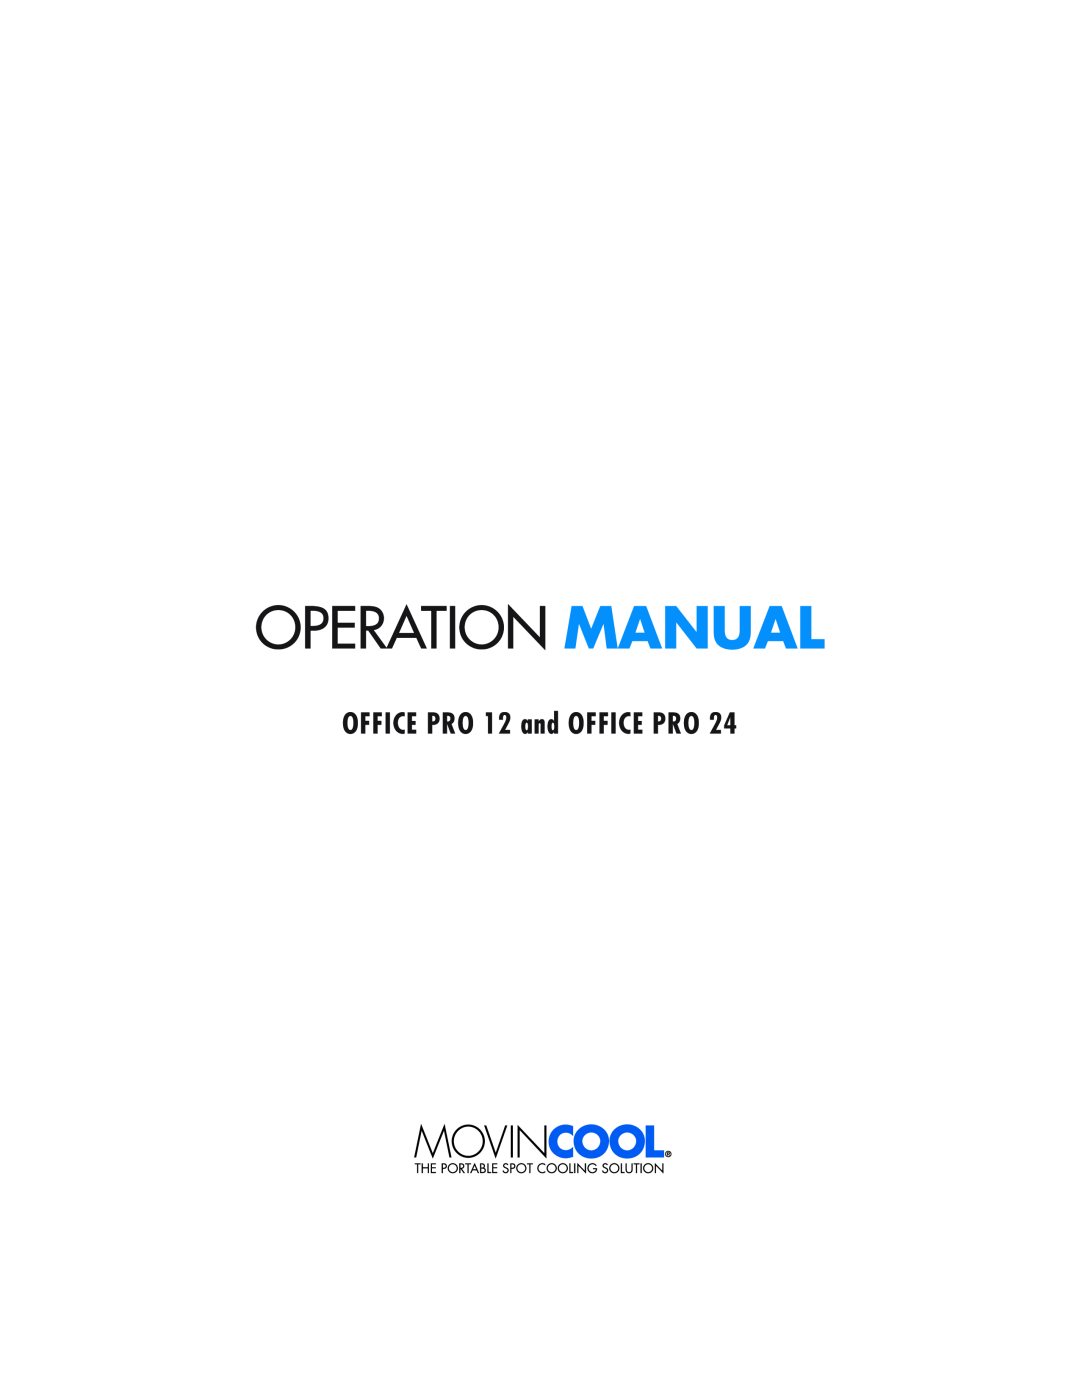 Denso OFFICE PRO 24 operation manual OFFICE PRO 12 and OFFICE PRO 